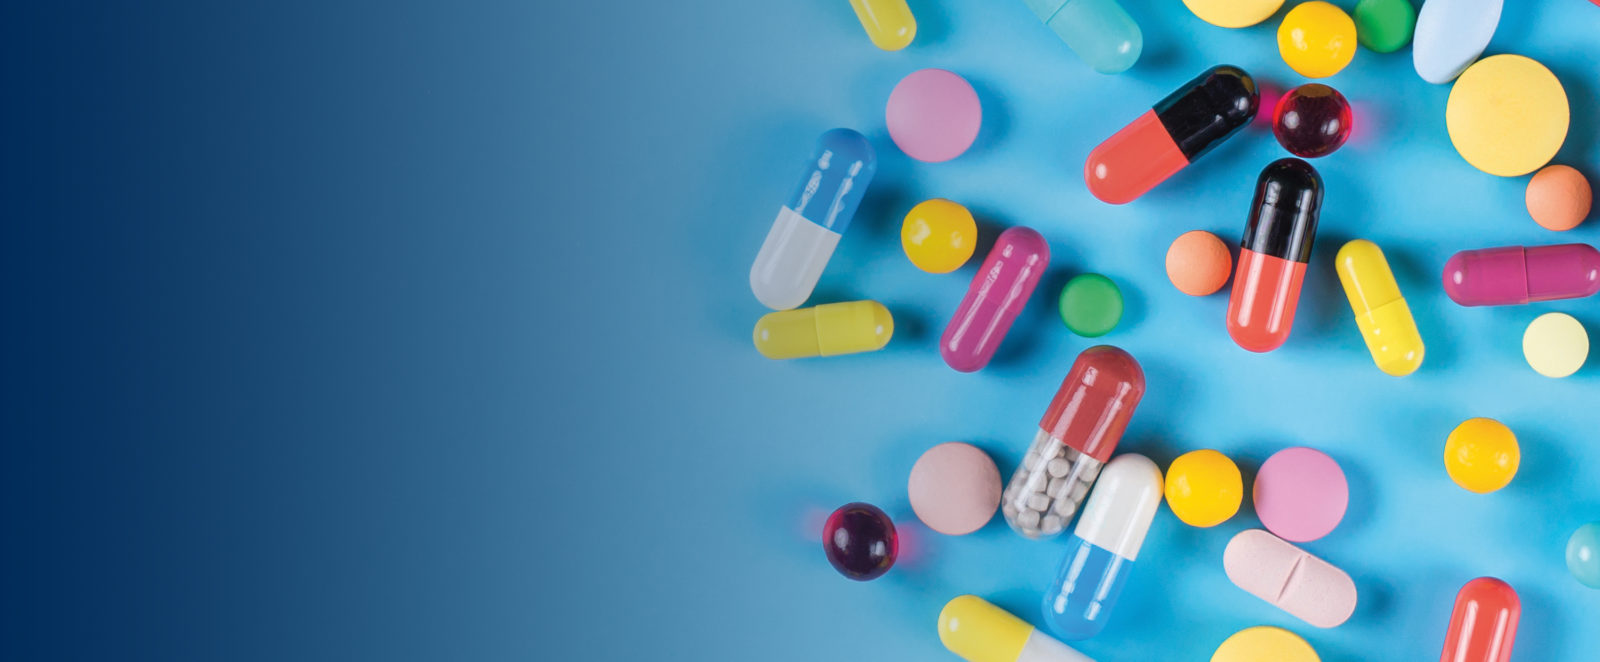 Medication Managers On-Demand Course Now Available!